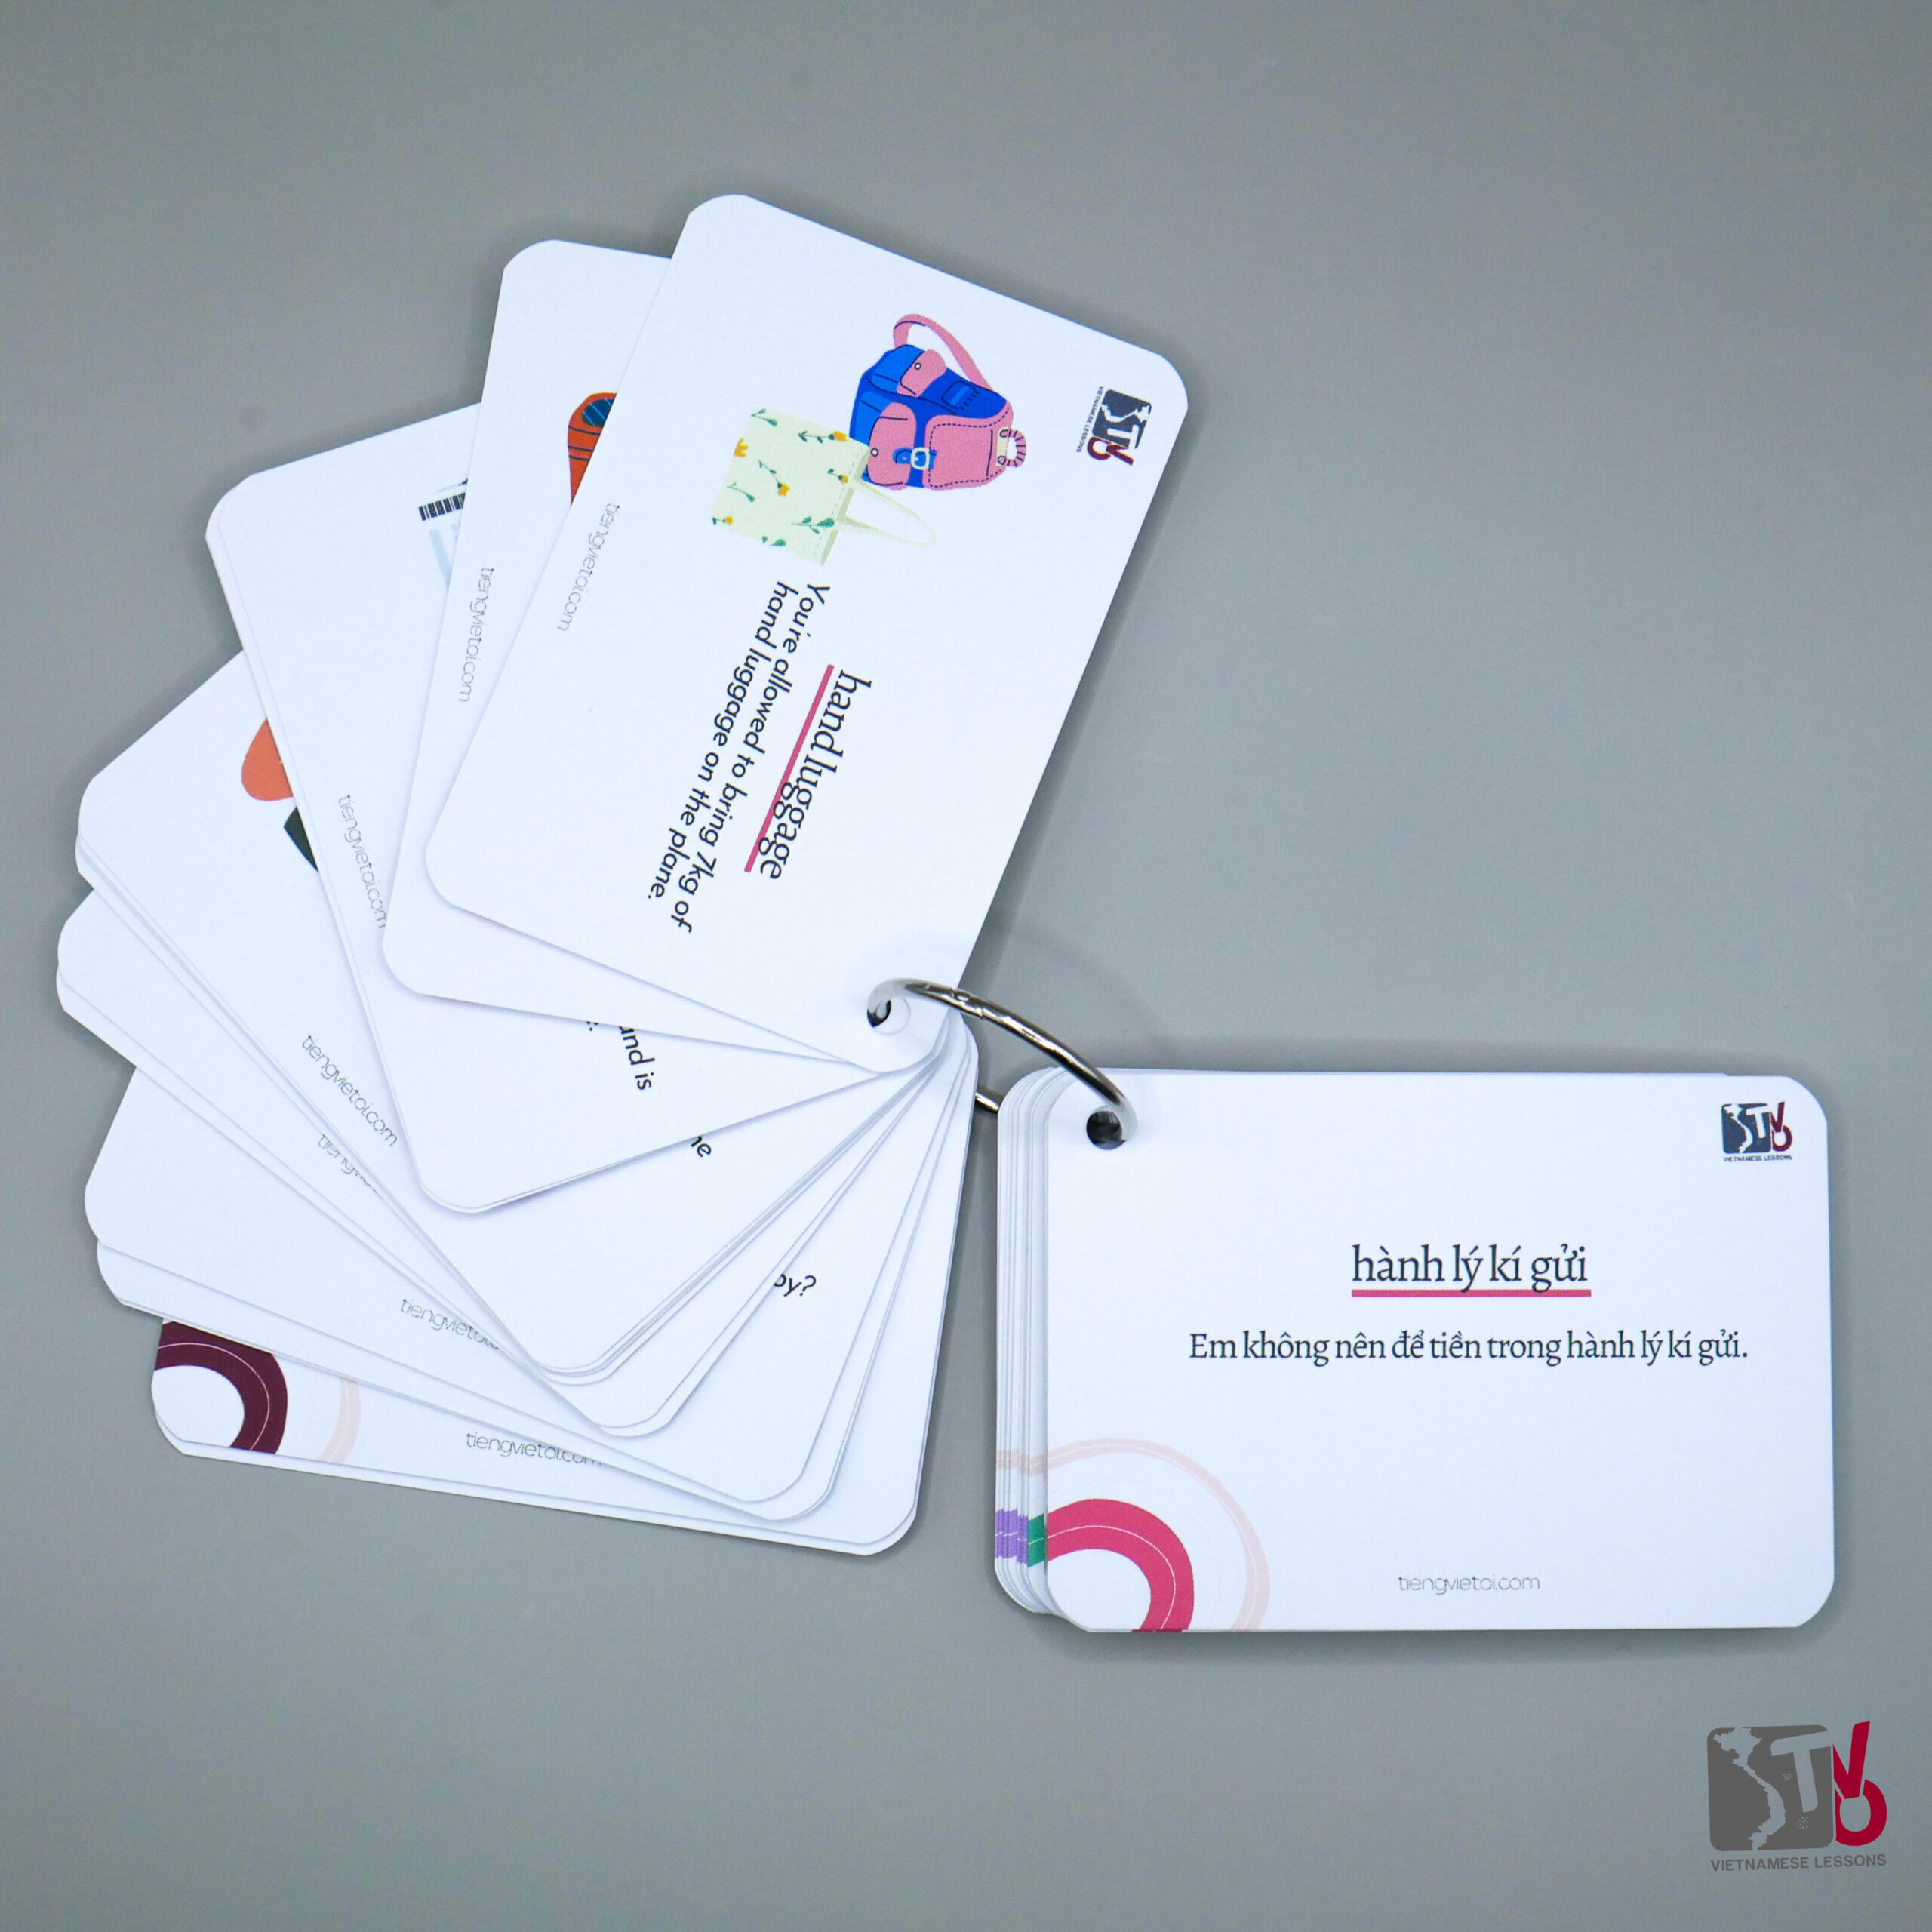 Travels Flashcards - Tieng Viet Oi